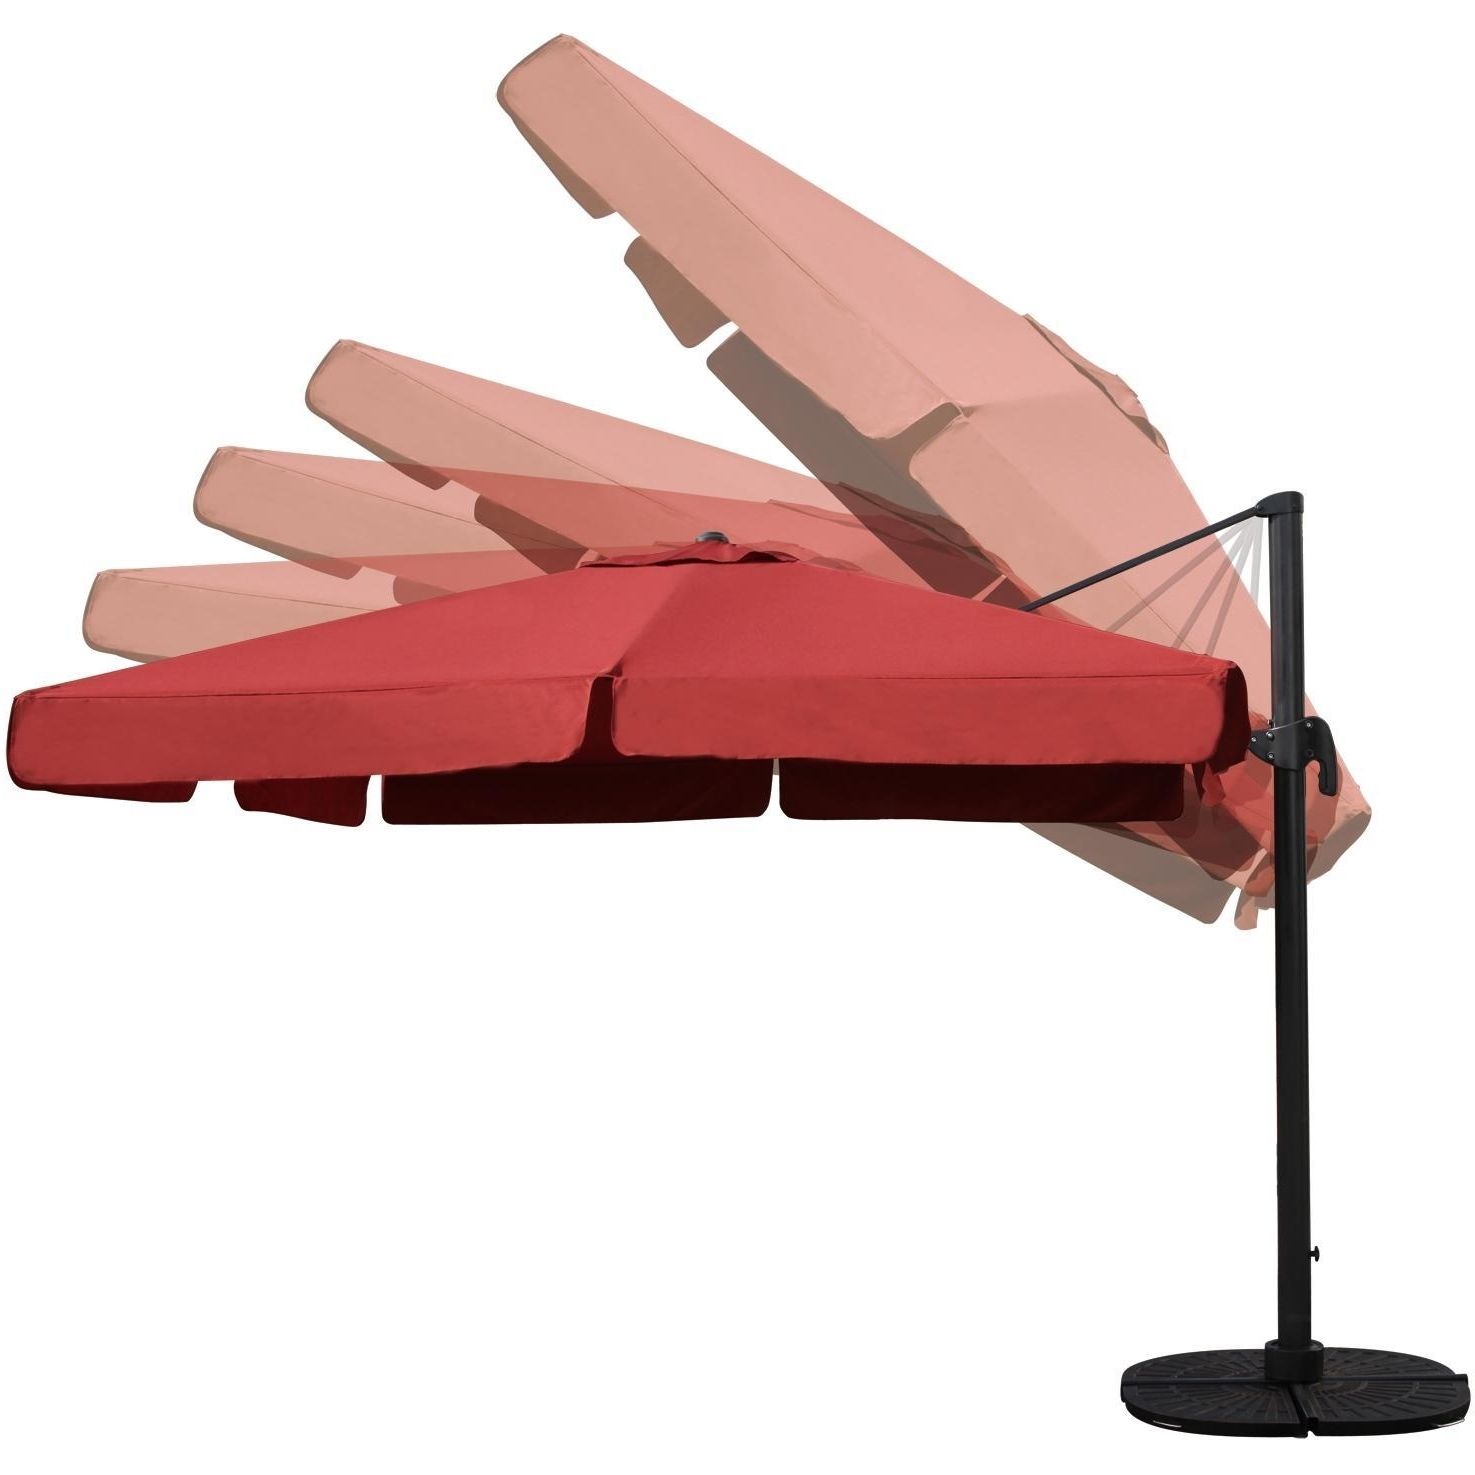 Most Recently Released Square Cantilever Patio Umbrellas Regarding Darlee 10 Ft Square Cantilever Patio Umbrella With Base – Henna (View 16 of 20)